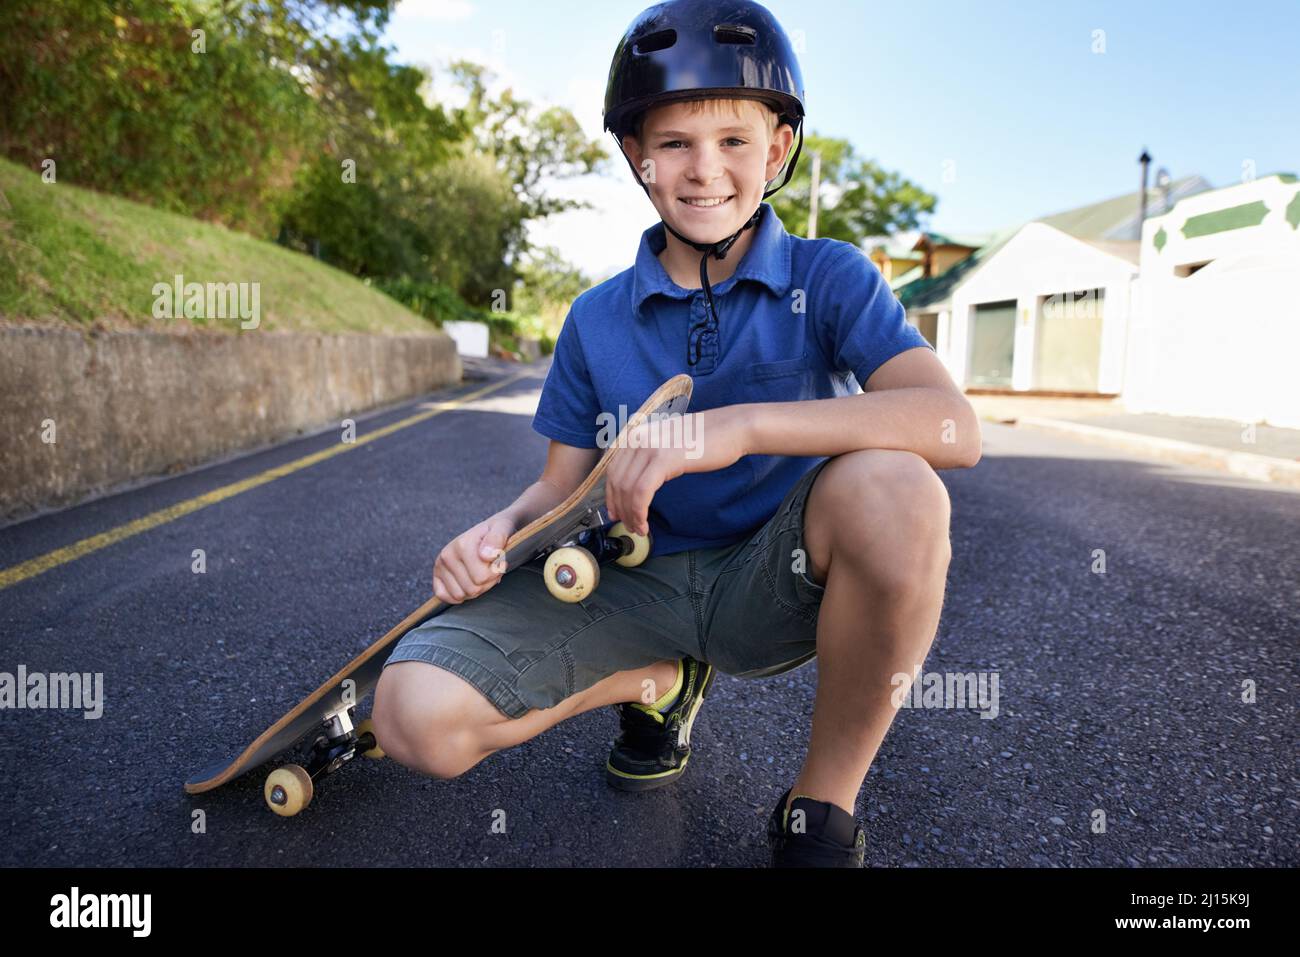 Ready to roll. A young boy with his skateboard. Stock Photo